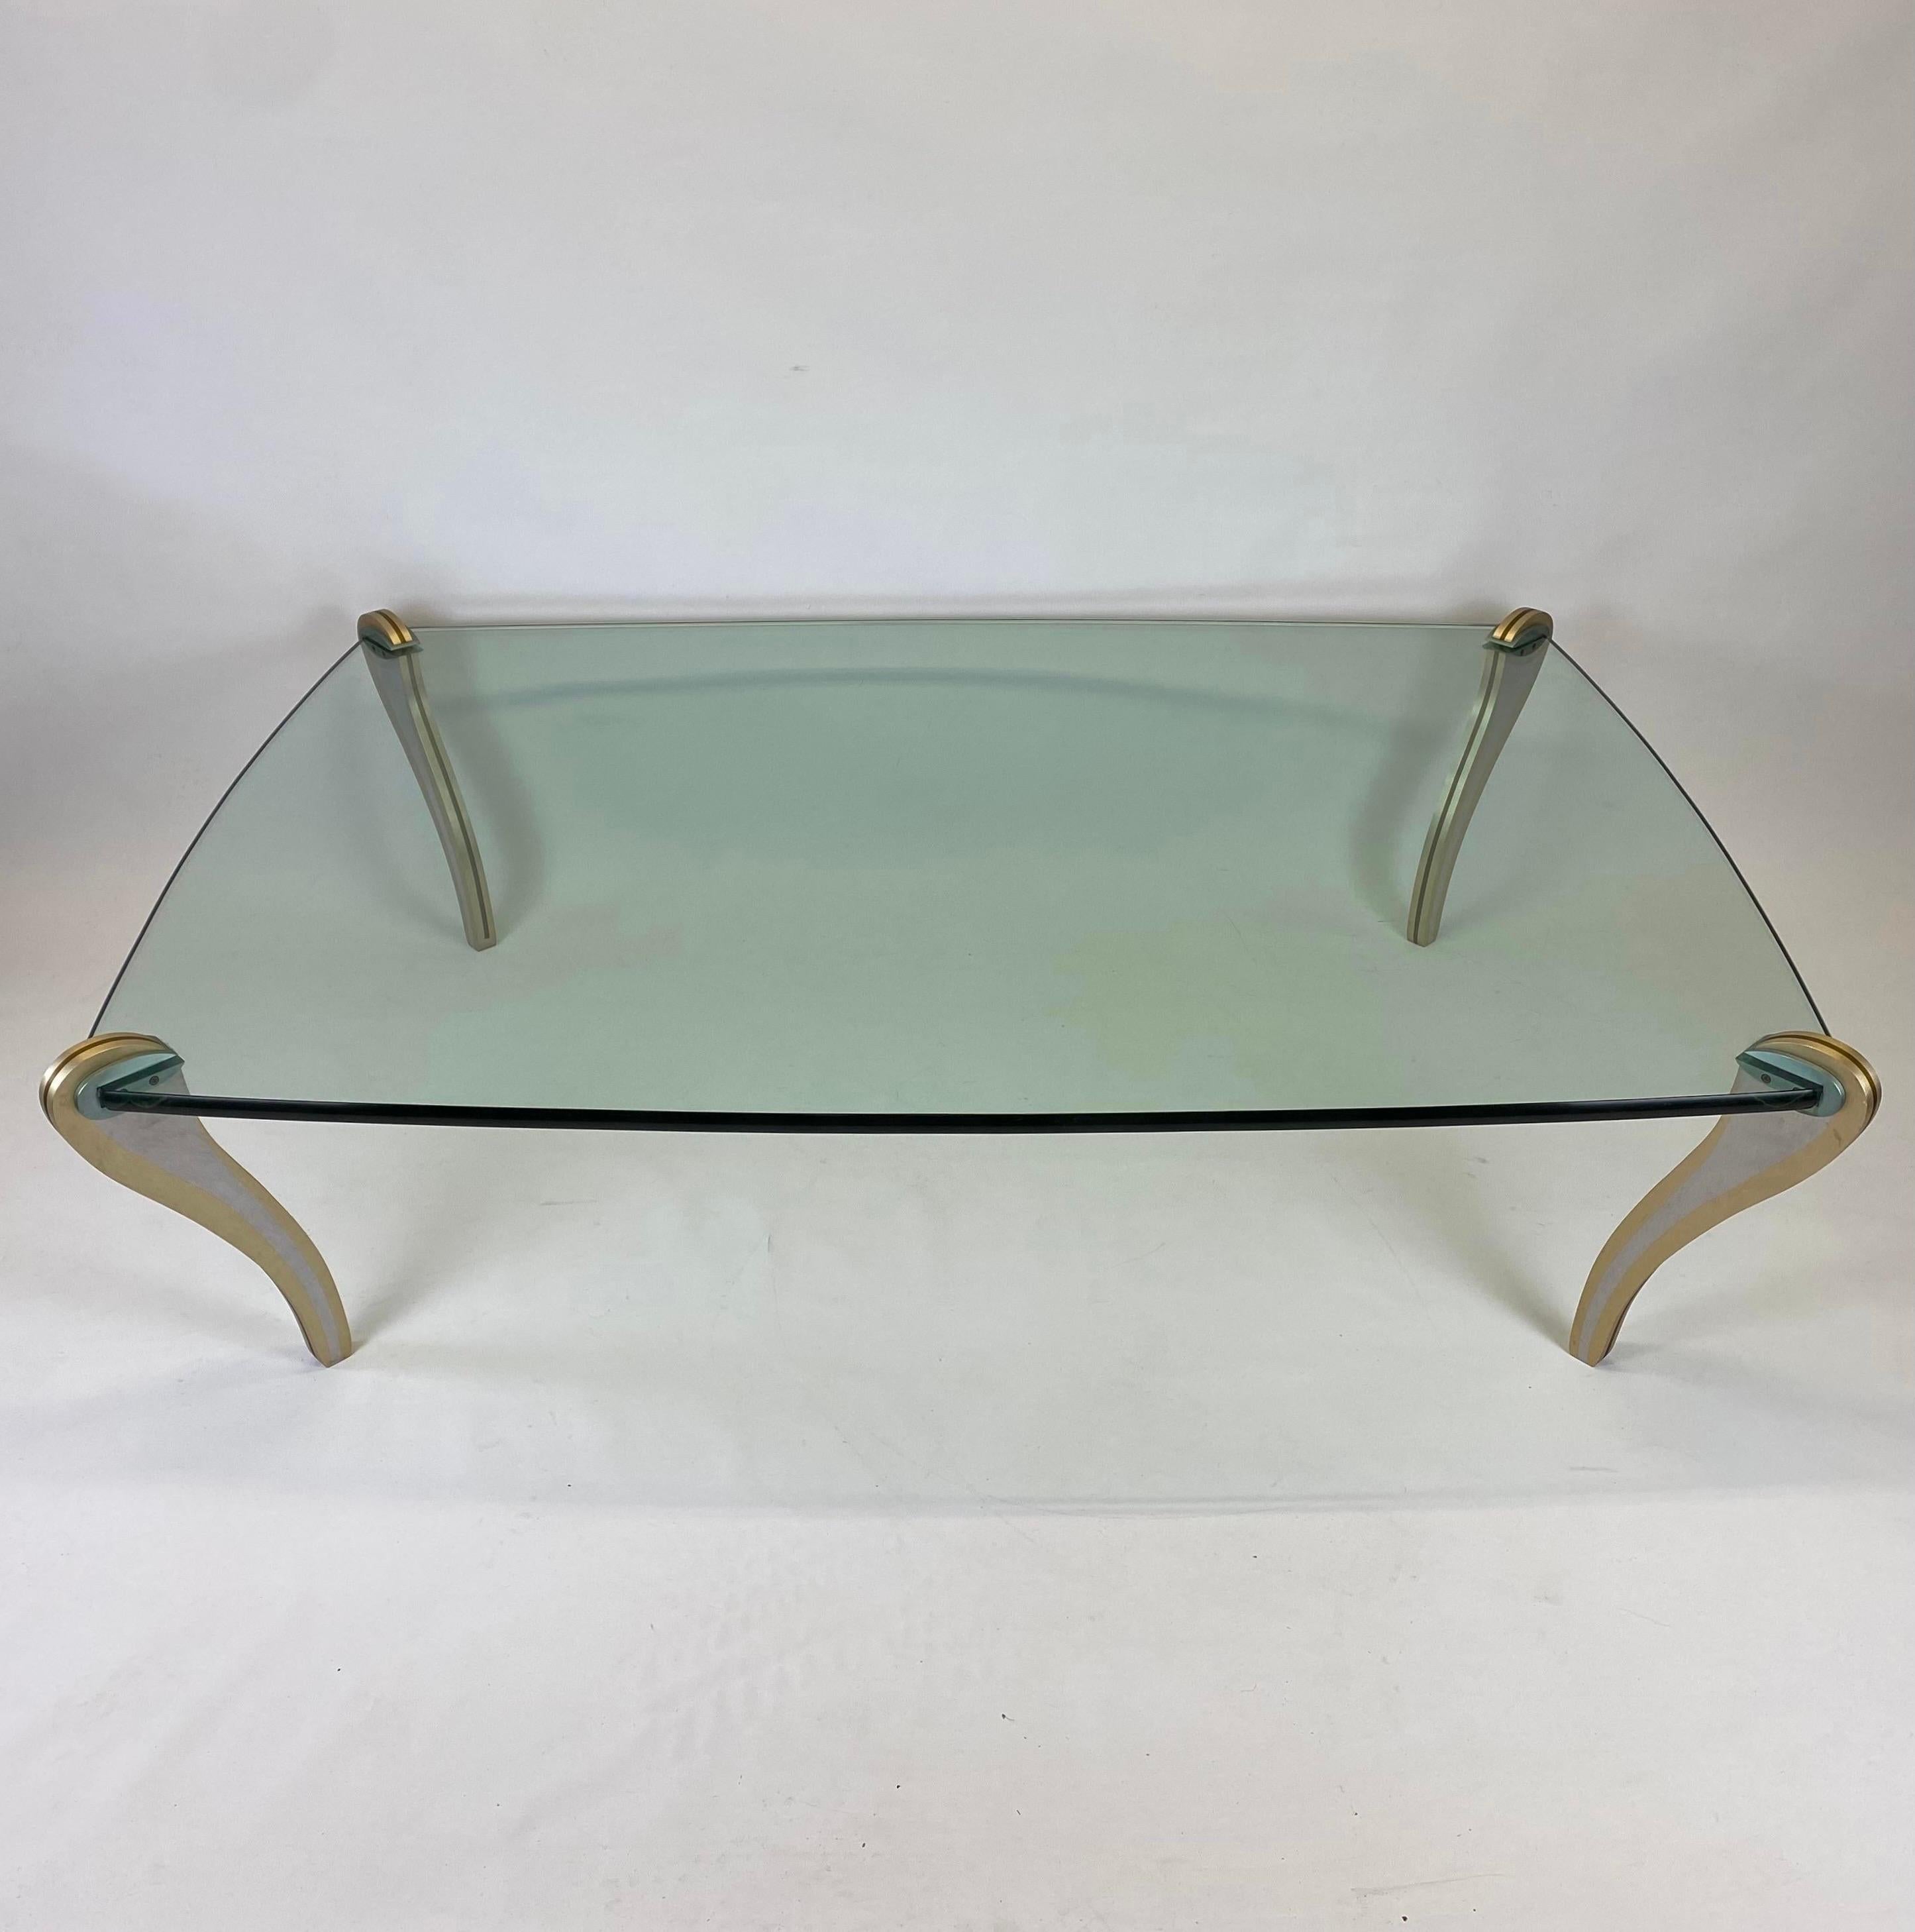 An amazing handmade artisan coffee table by Peter Handler for Handler Studio featuring mixed metals sculptural legs attached to a thick shaped glass top. Inlaid metal 